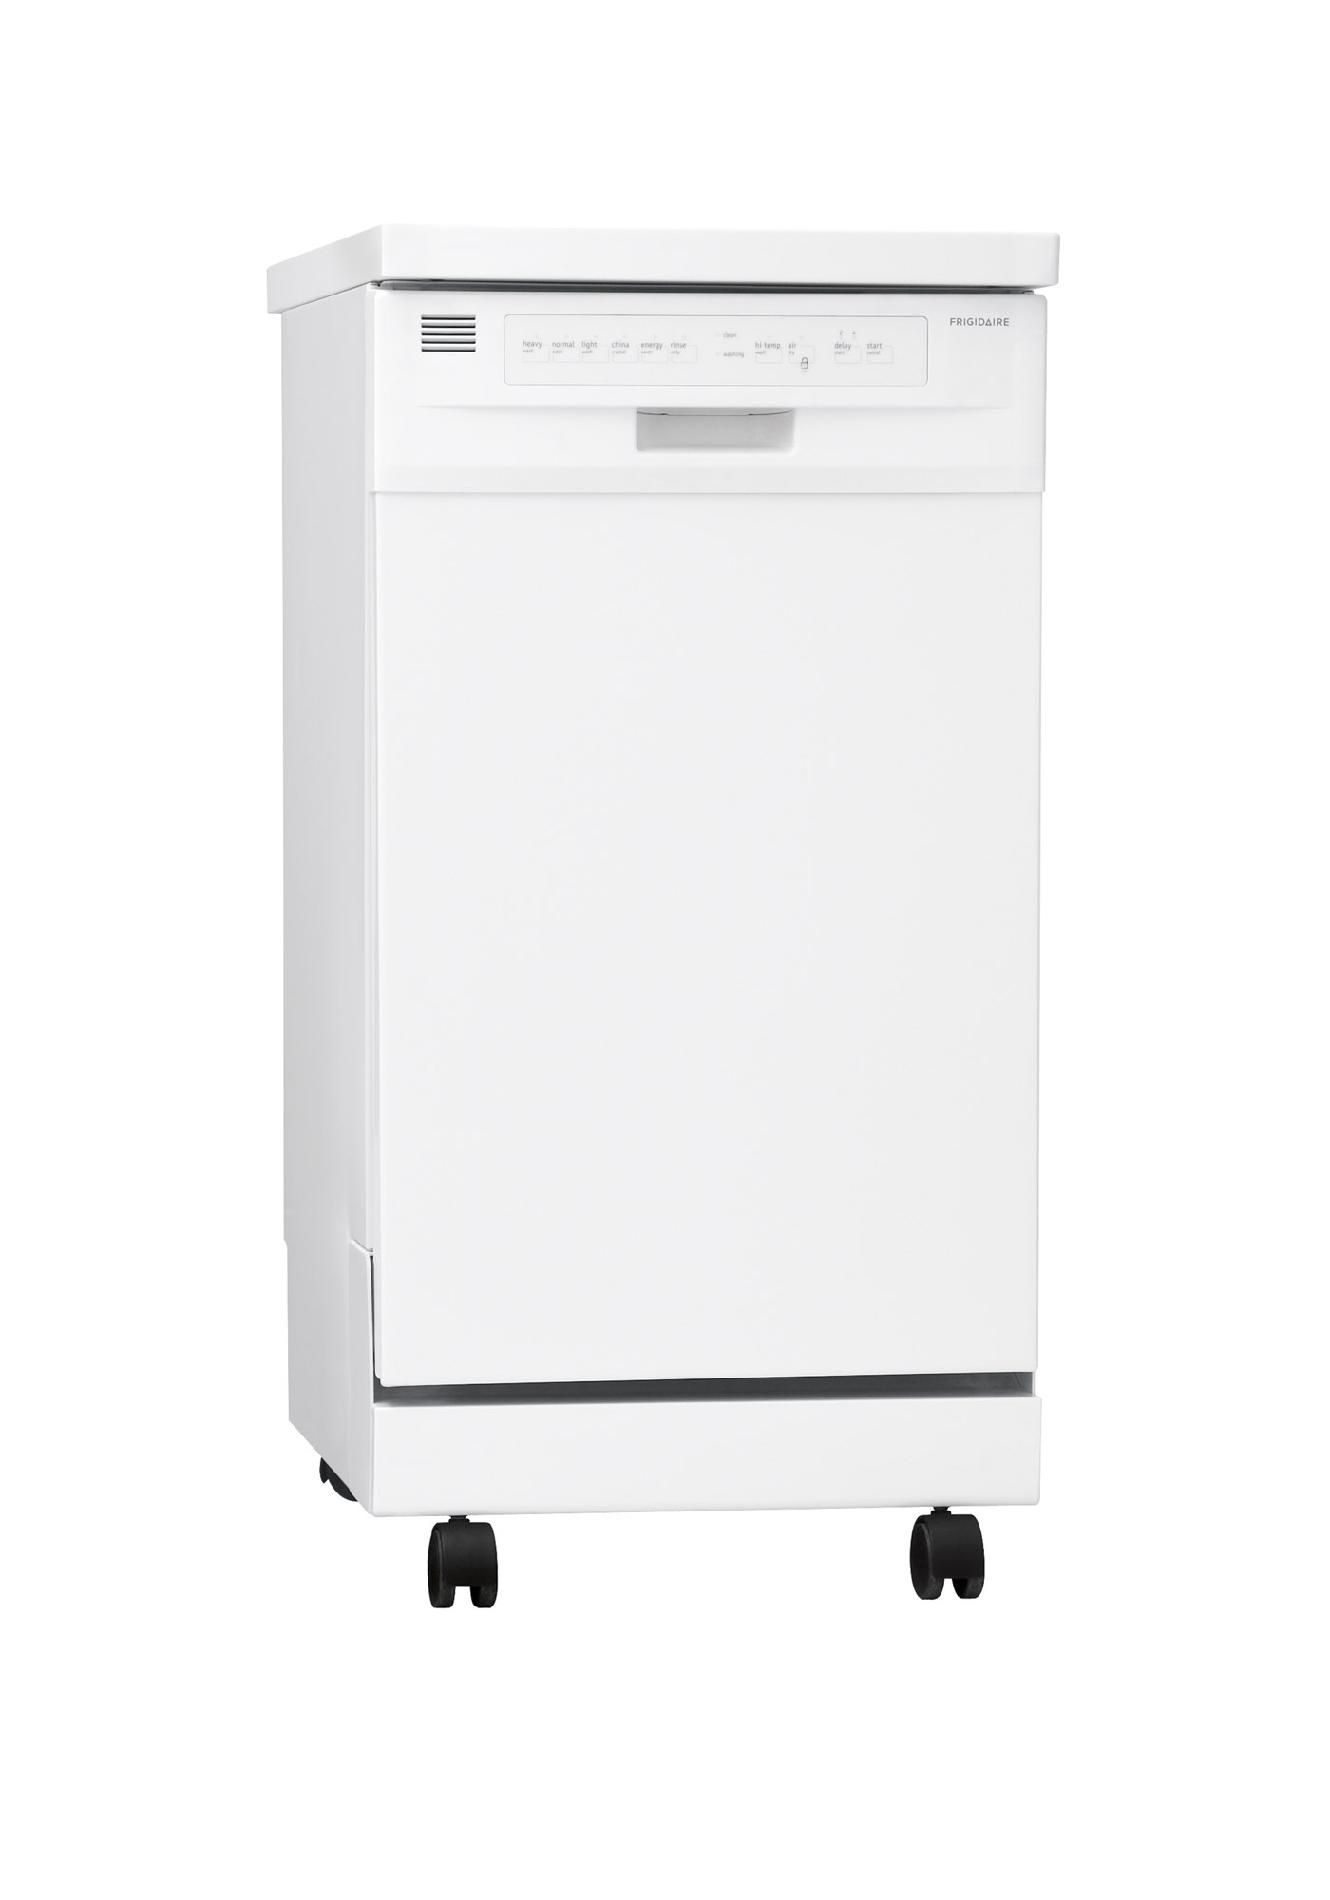 Frigidaire Ffpd1821mw Portable Dishwasher White Sears Outlet